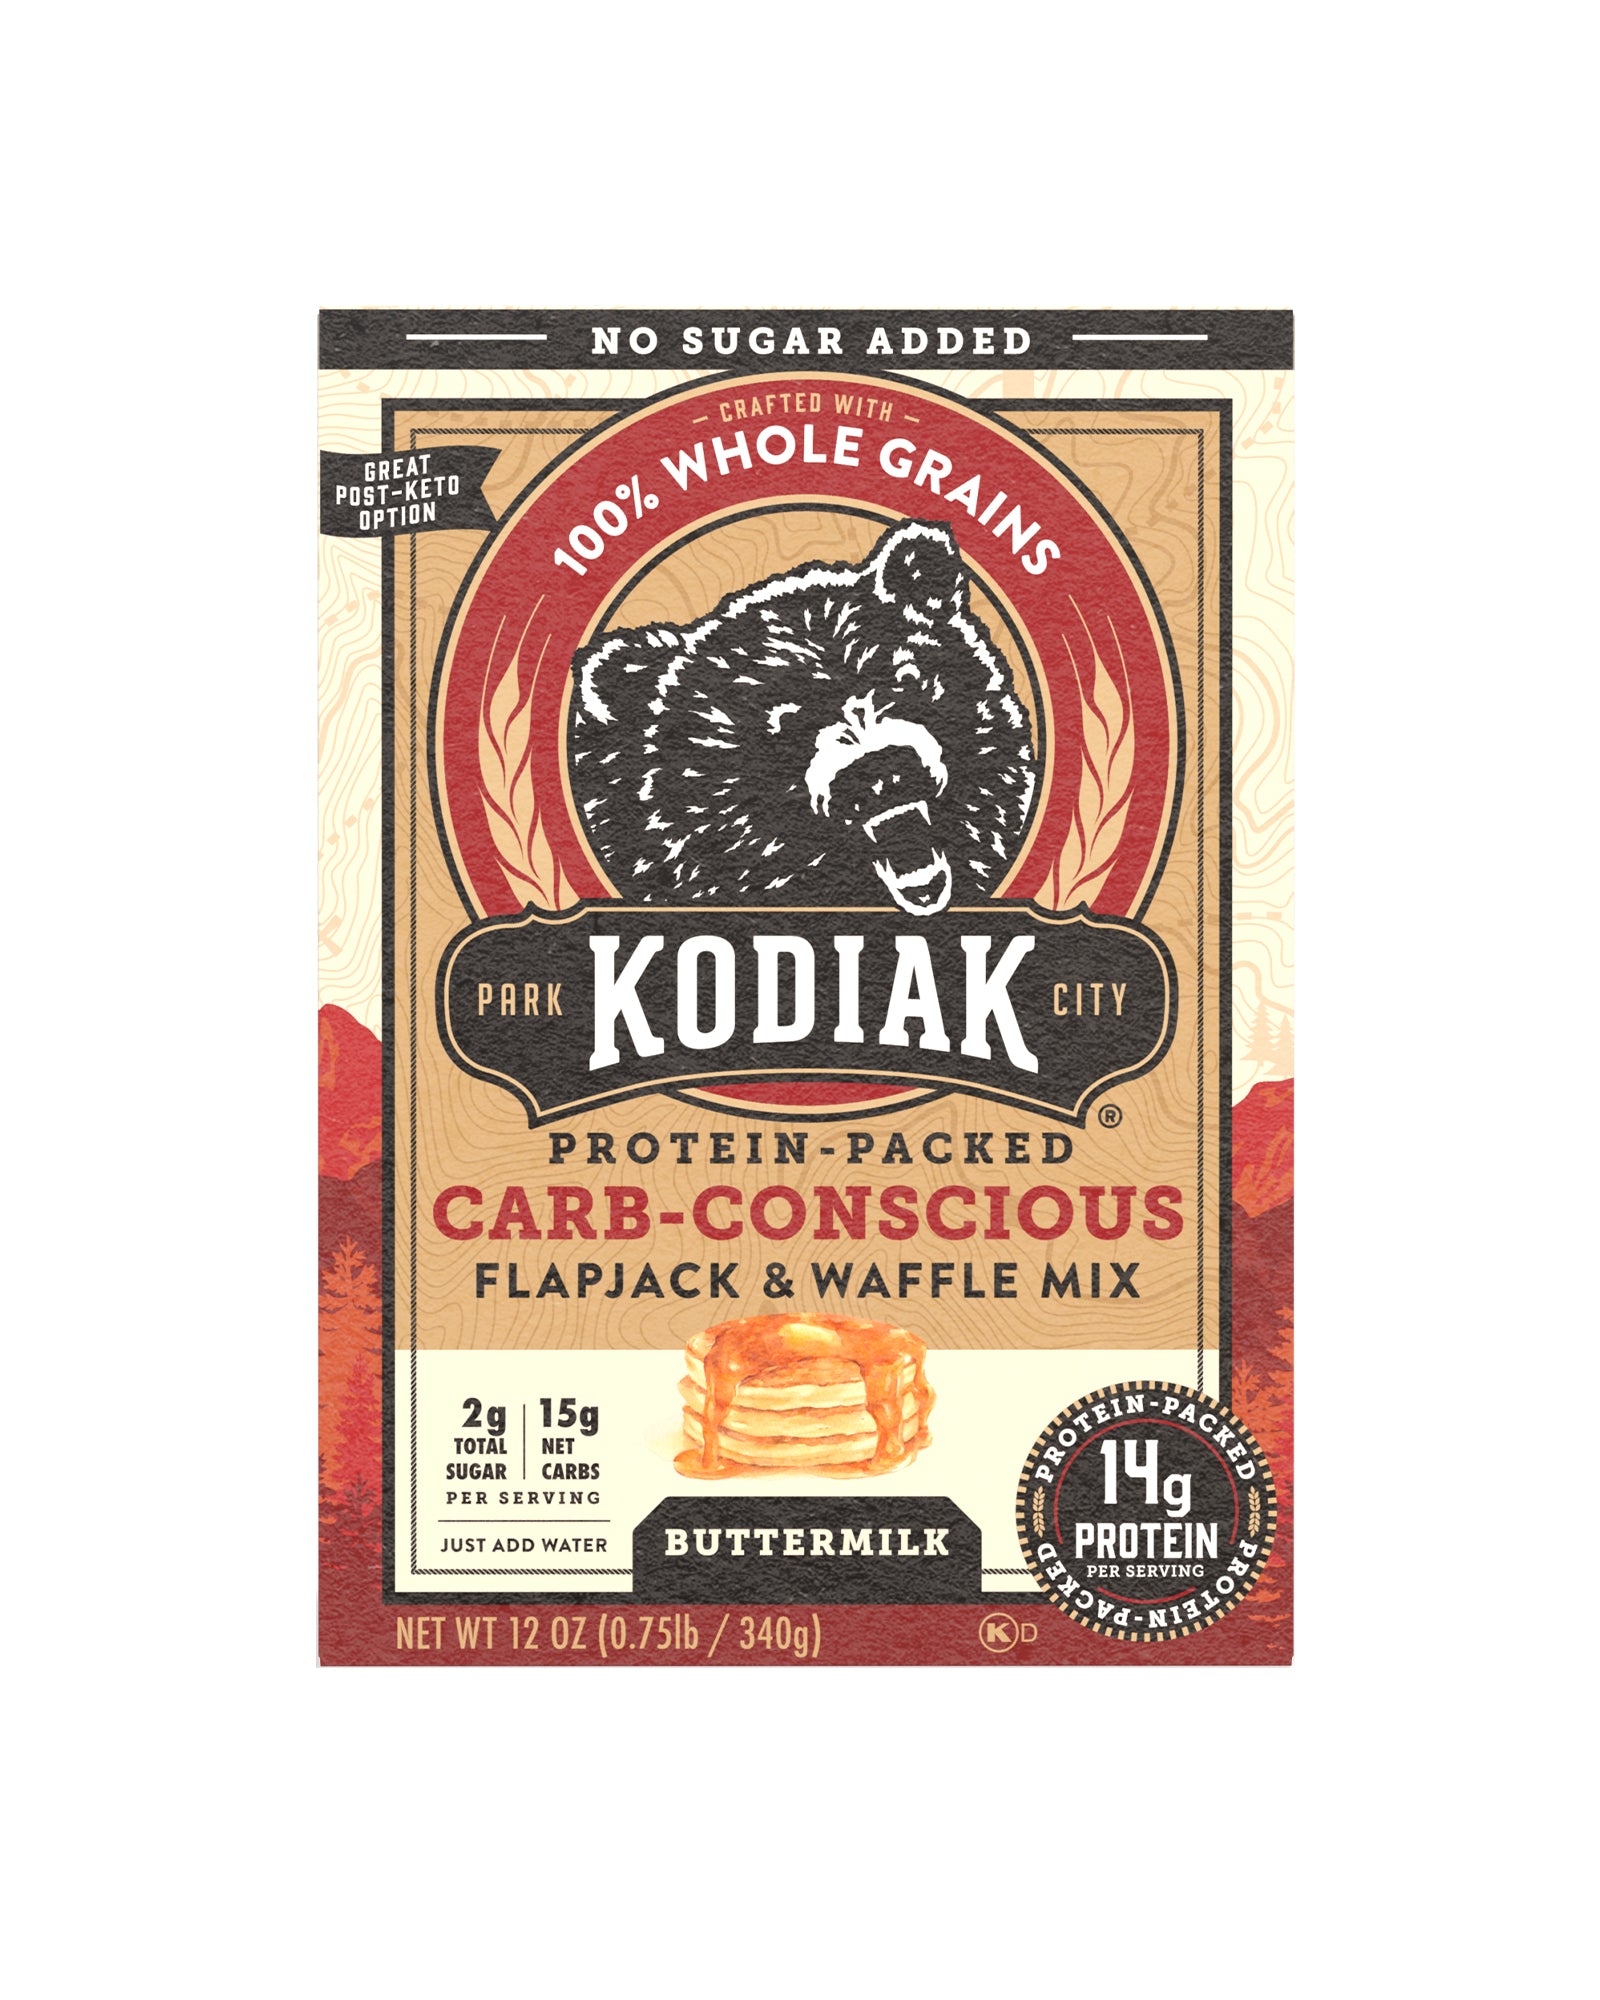 Grizzly Size Buttermilk Power Cakes | Kodiak cakes, Waffle mix, Cake sizes  and servings